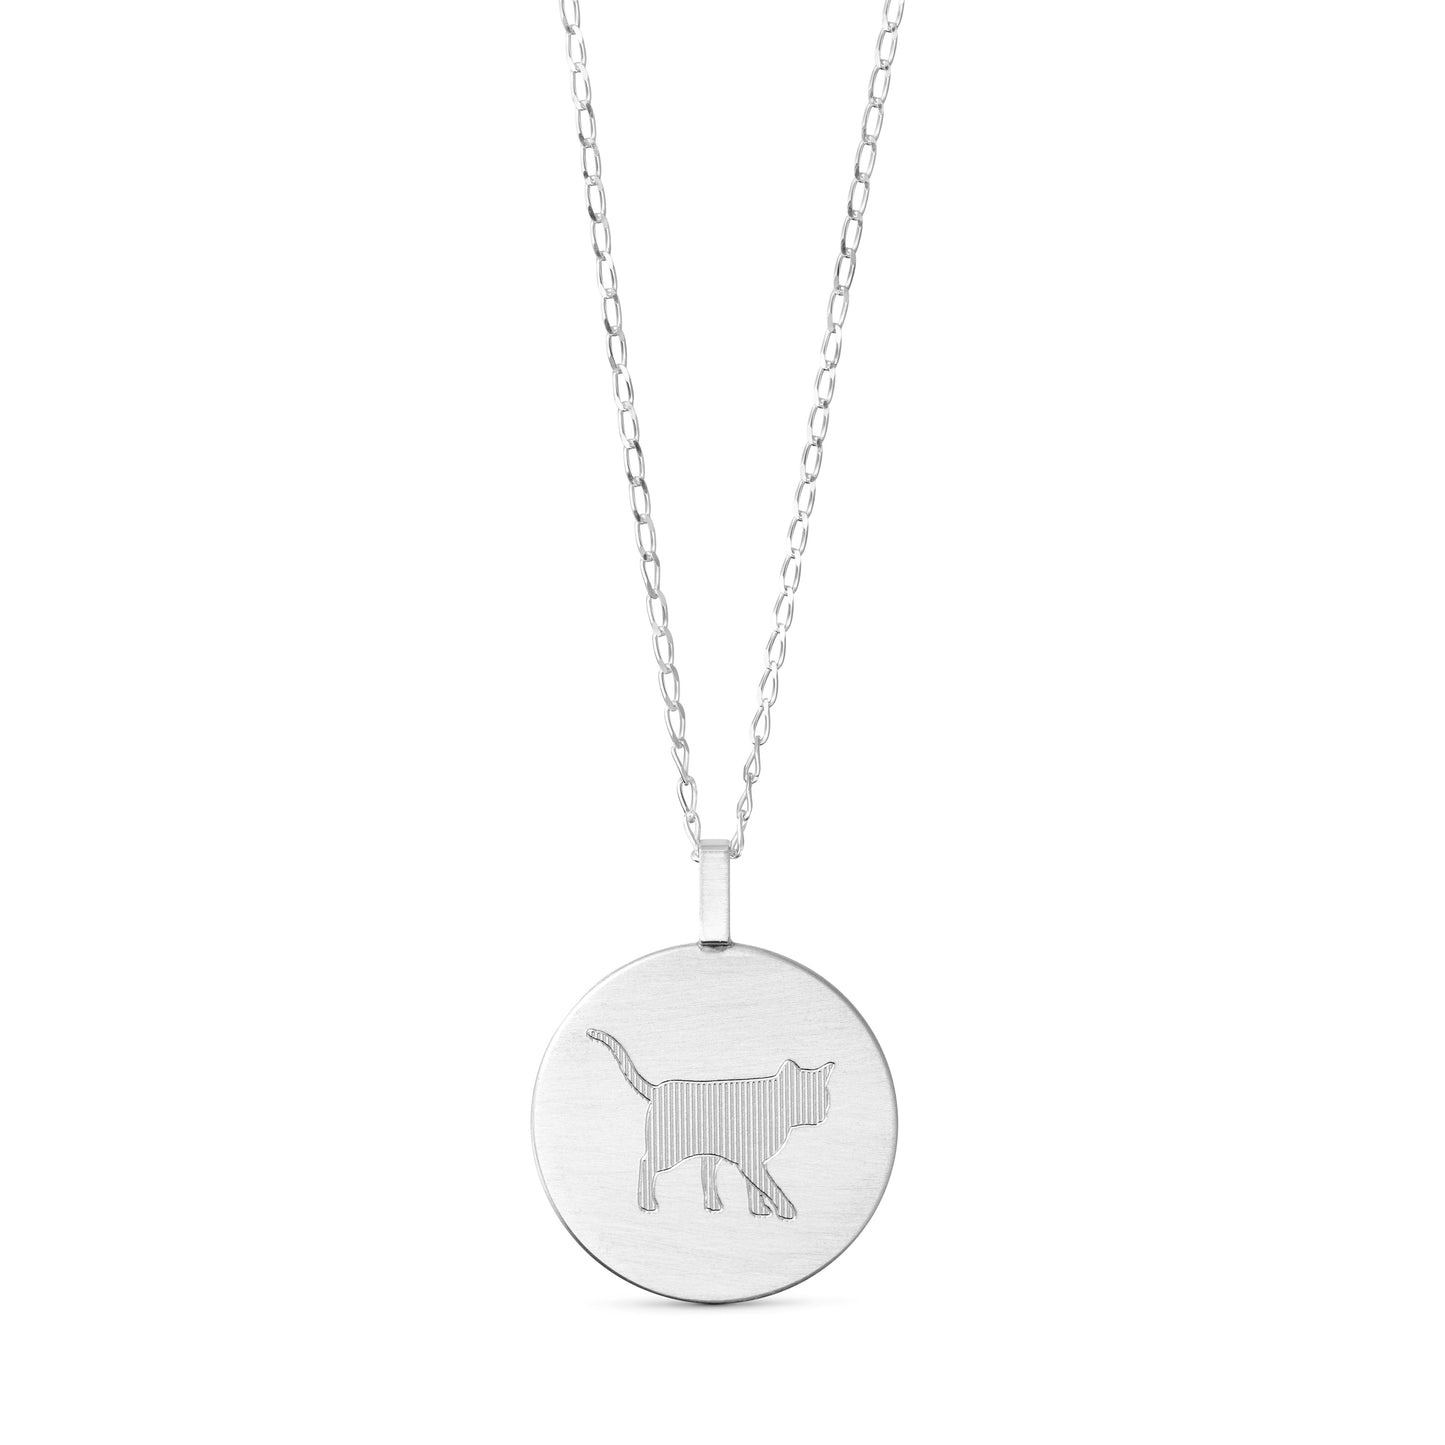 Pendant with pet